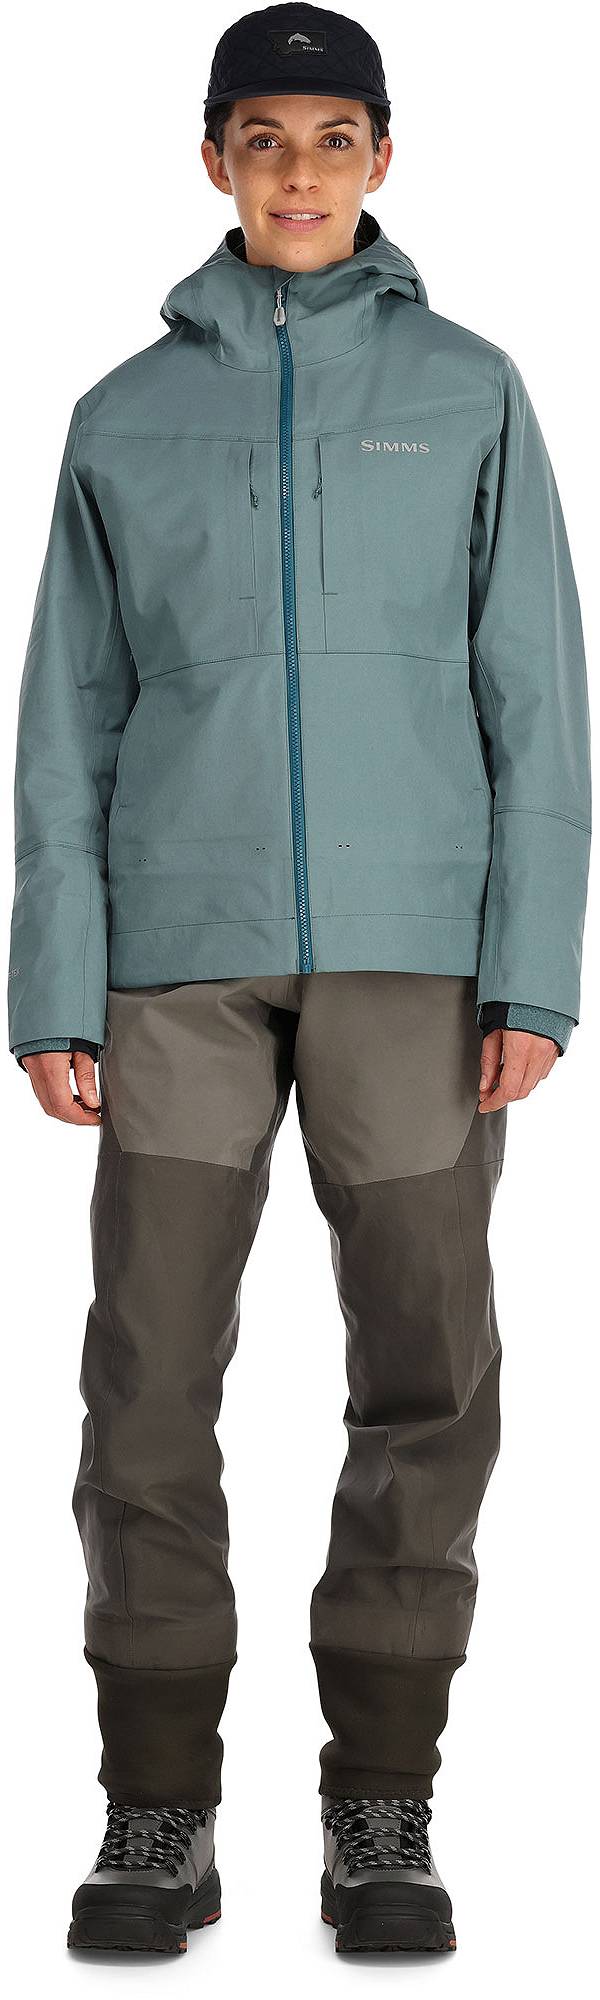 Simms G3 Guide Jacket - Women's - Avalon Teal - XS